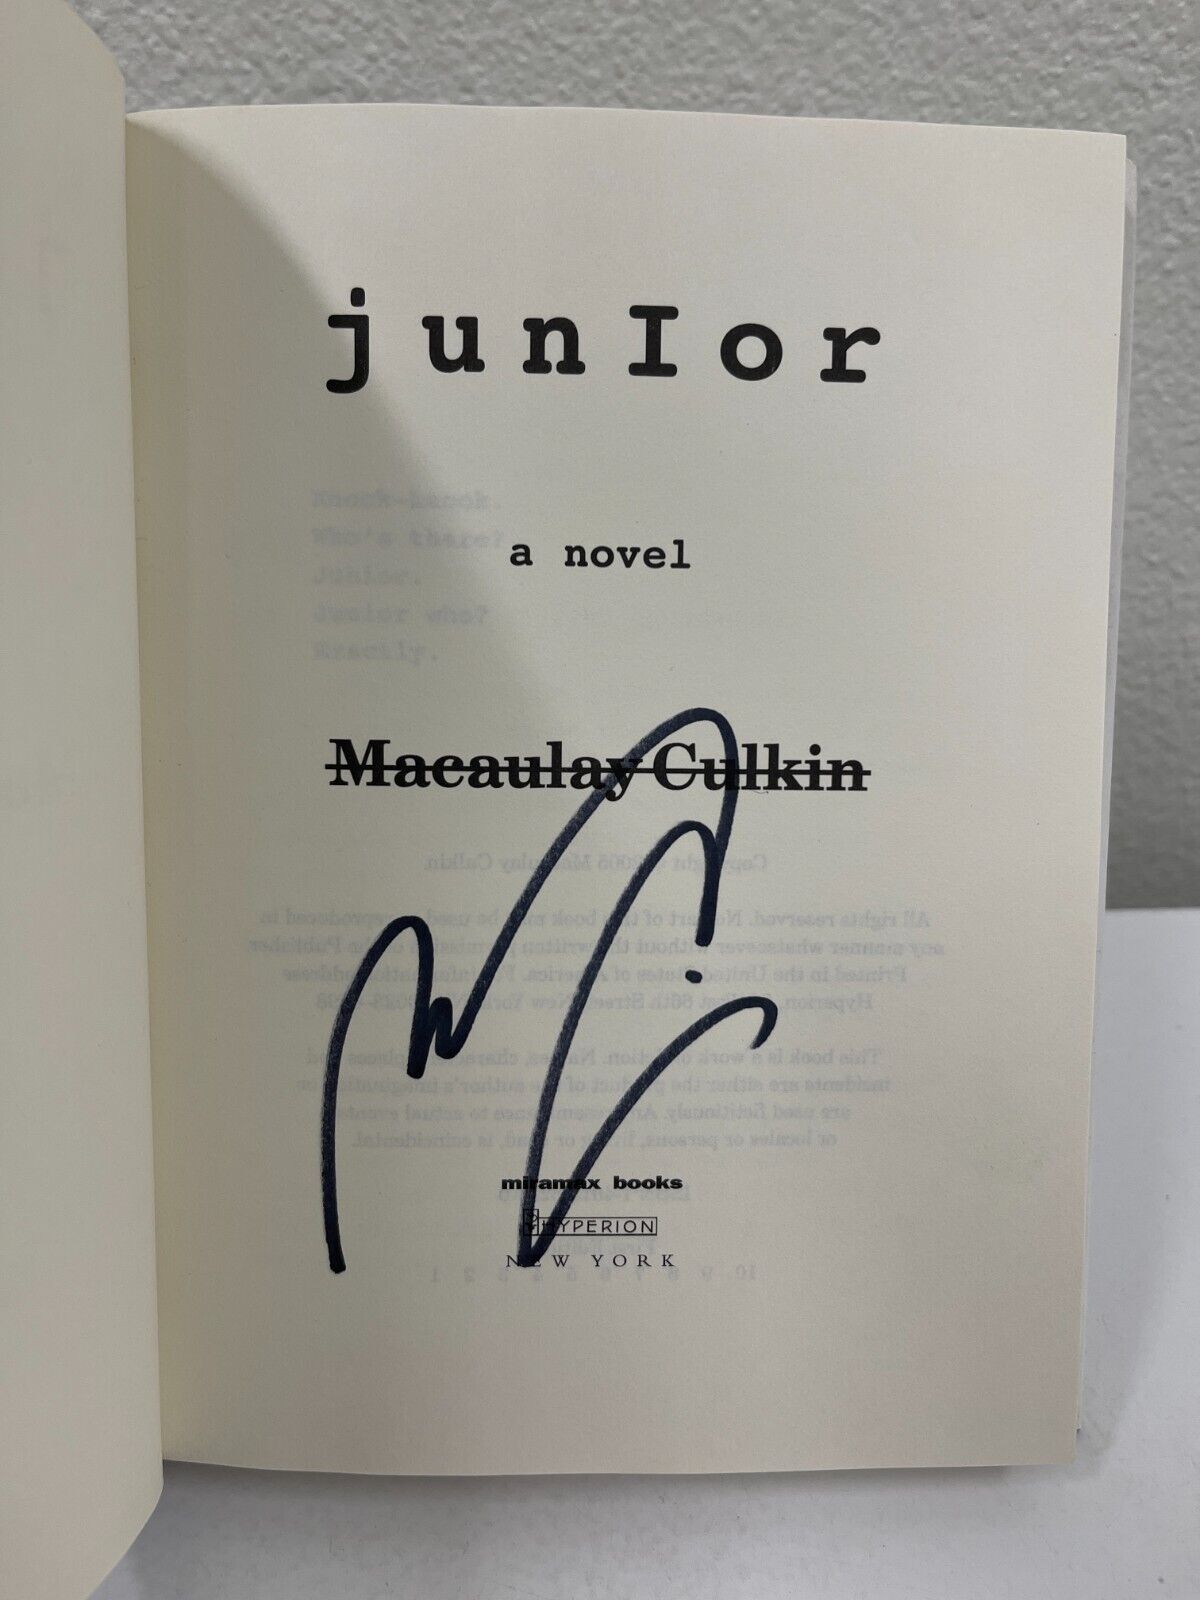 Macaulay Culkin Signed Junior Hardcover Book Authentic Autograph